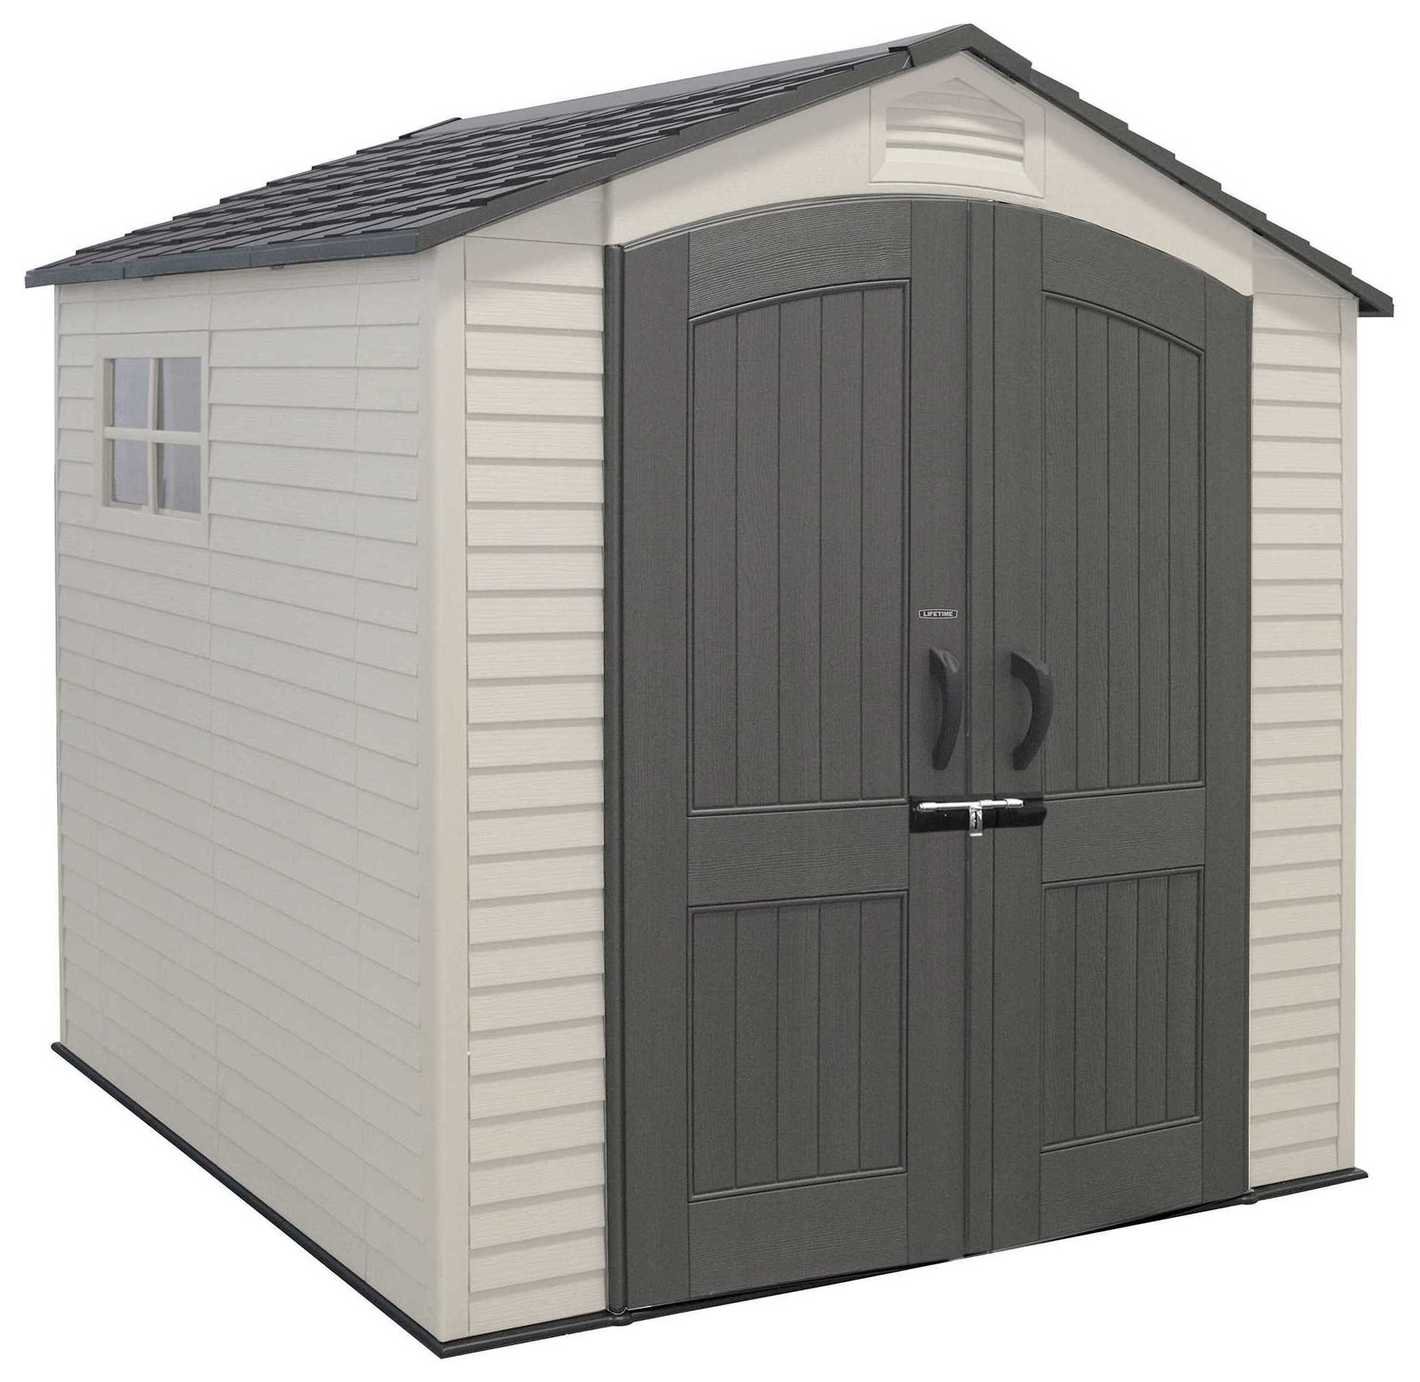 Lifetime 7 x 7ft Plastic Outdoor Storage Shed